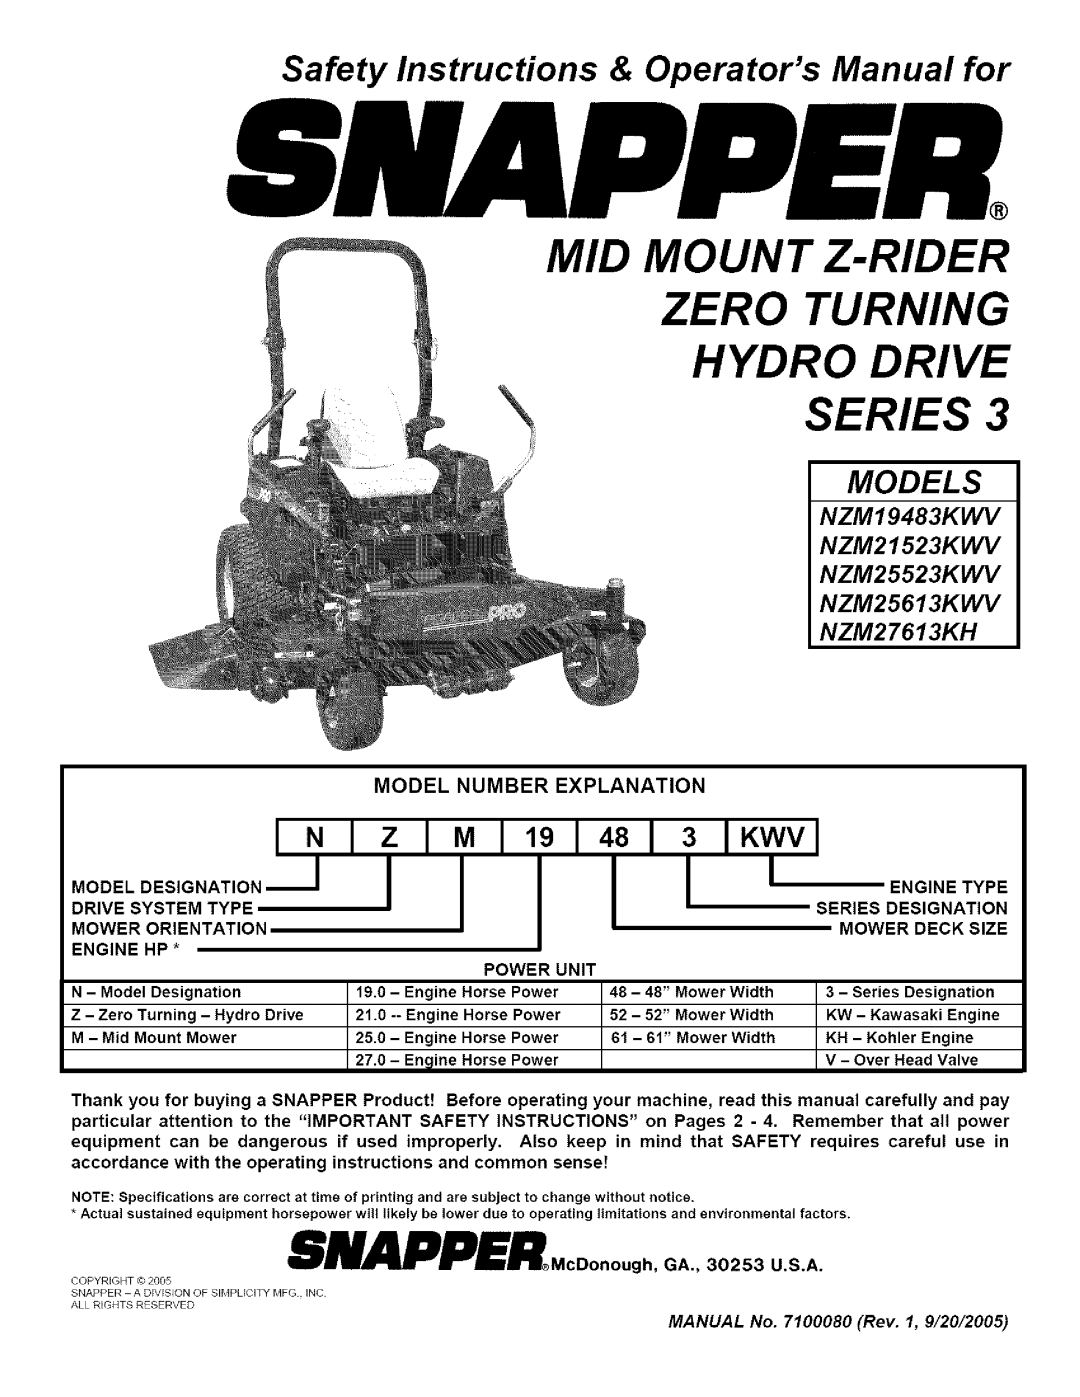 Snapper NZM25523KWV important safety instructions Safety Instructions & Operators Manual for, Model Designation, Engine 